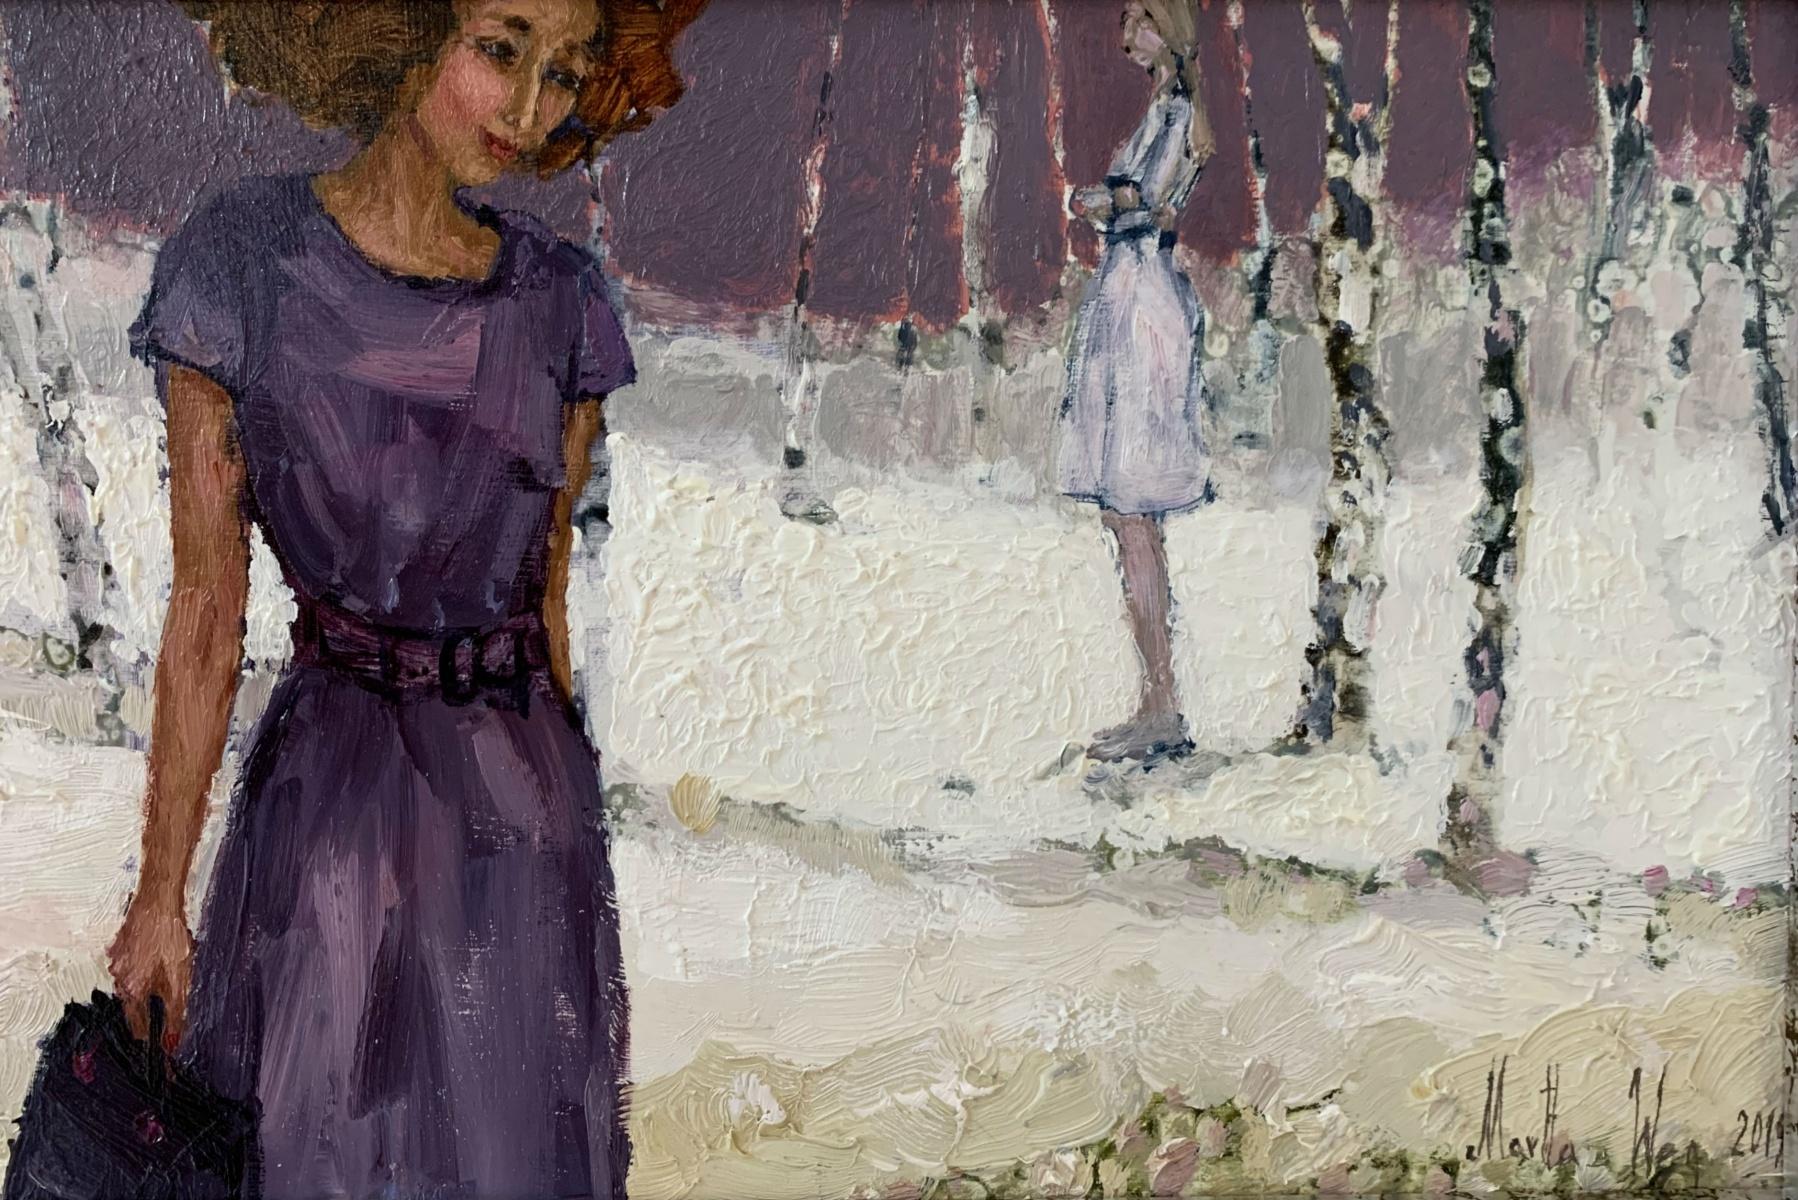 Mourning conversations - XXI century, Oil figurative painting colorful landscape - Gray Landscape Painting by Martta Węg